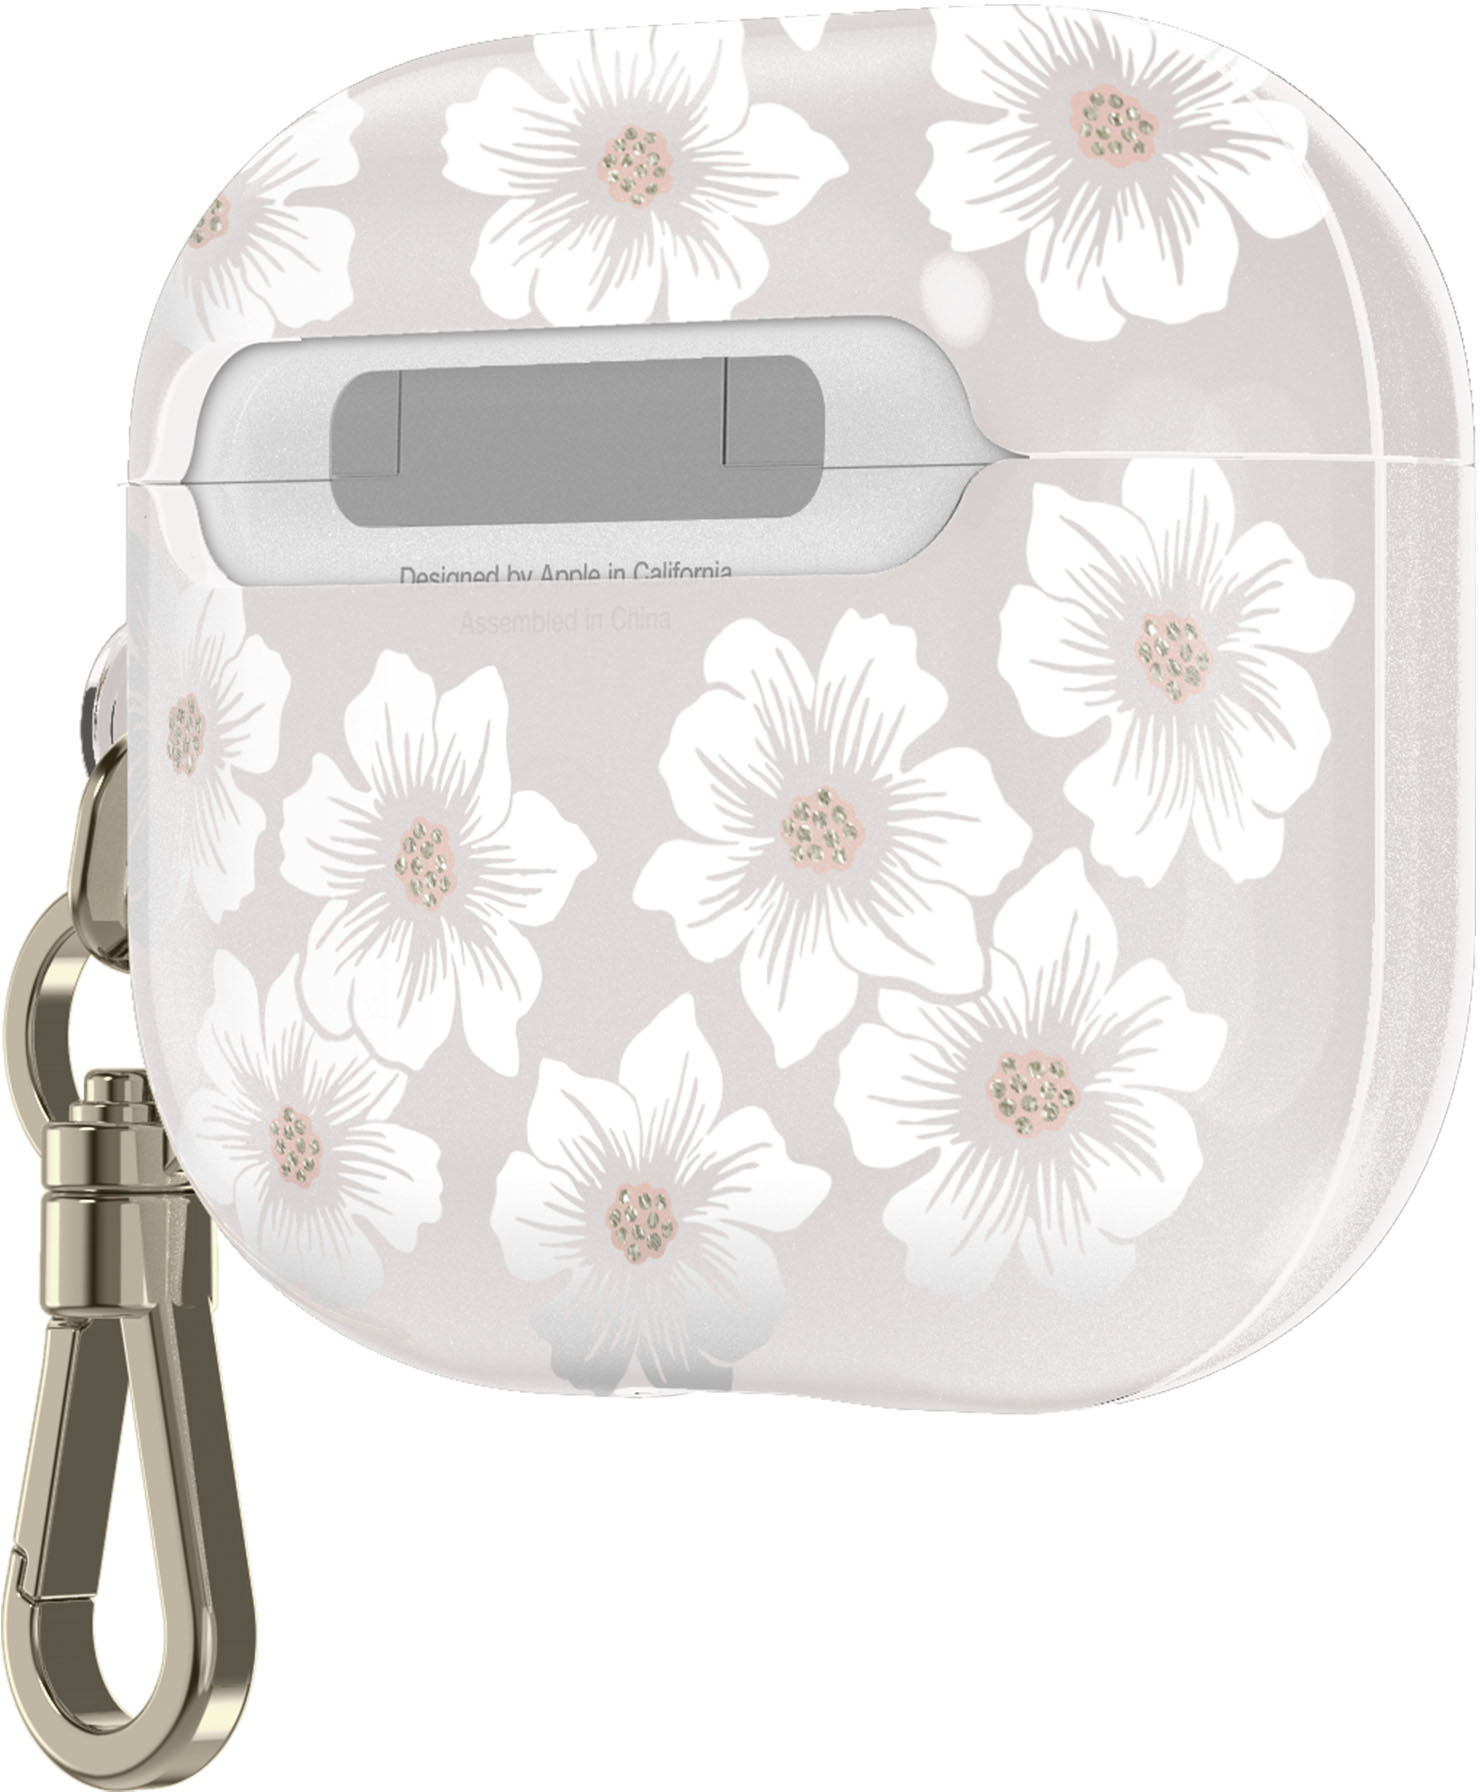 Angle View: kate spade new york - Protective AirPods (3rd Generation) Case - Hollyhock